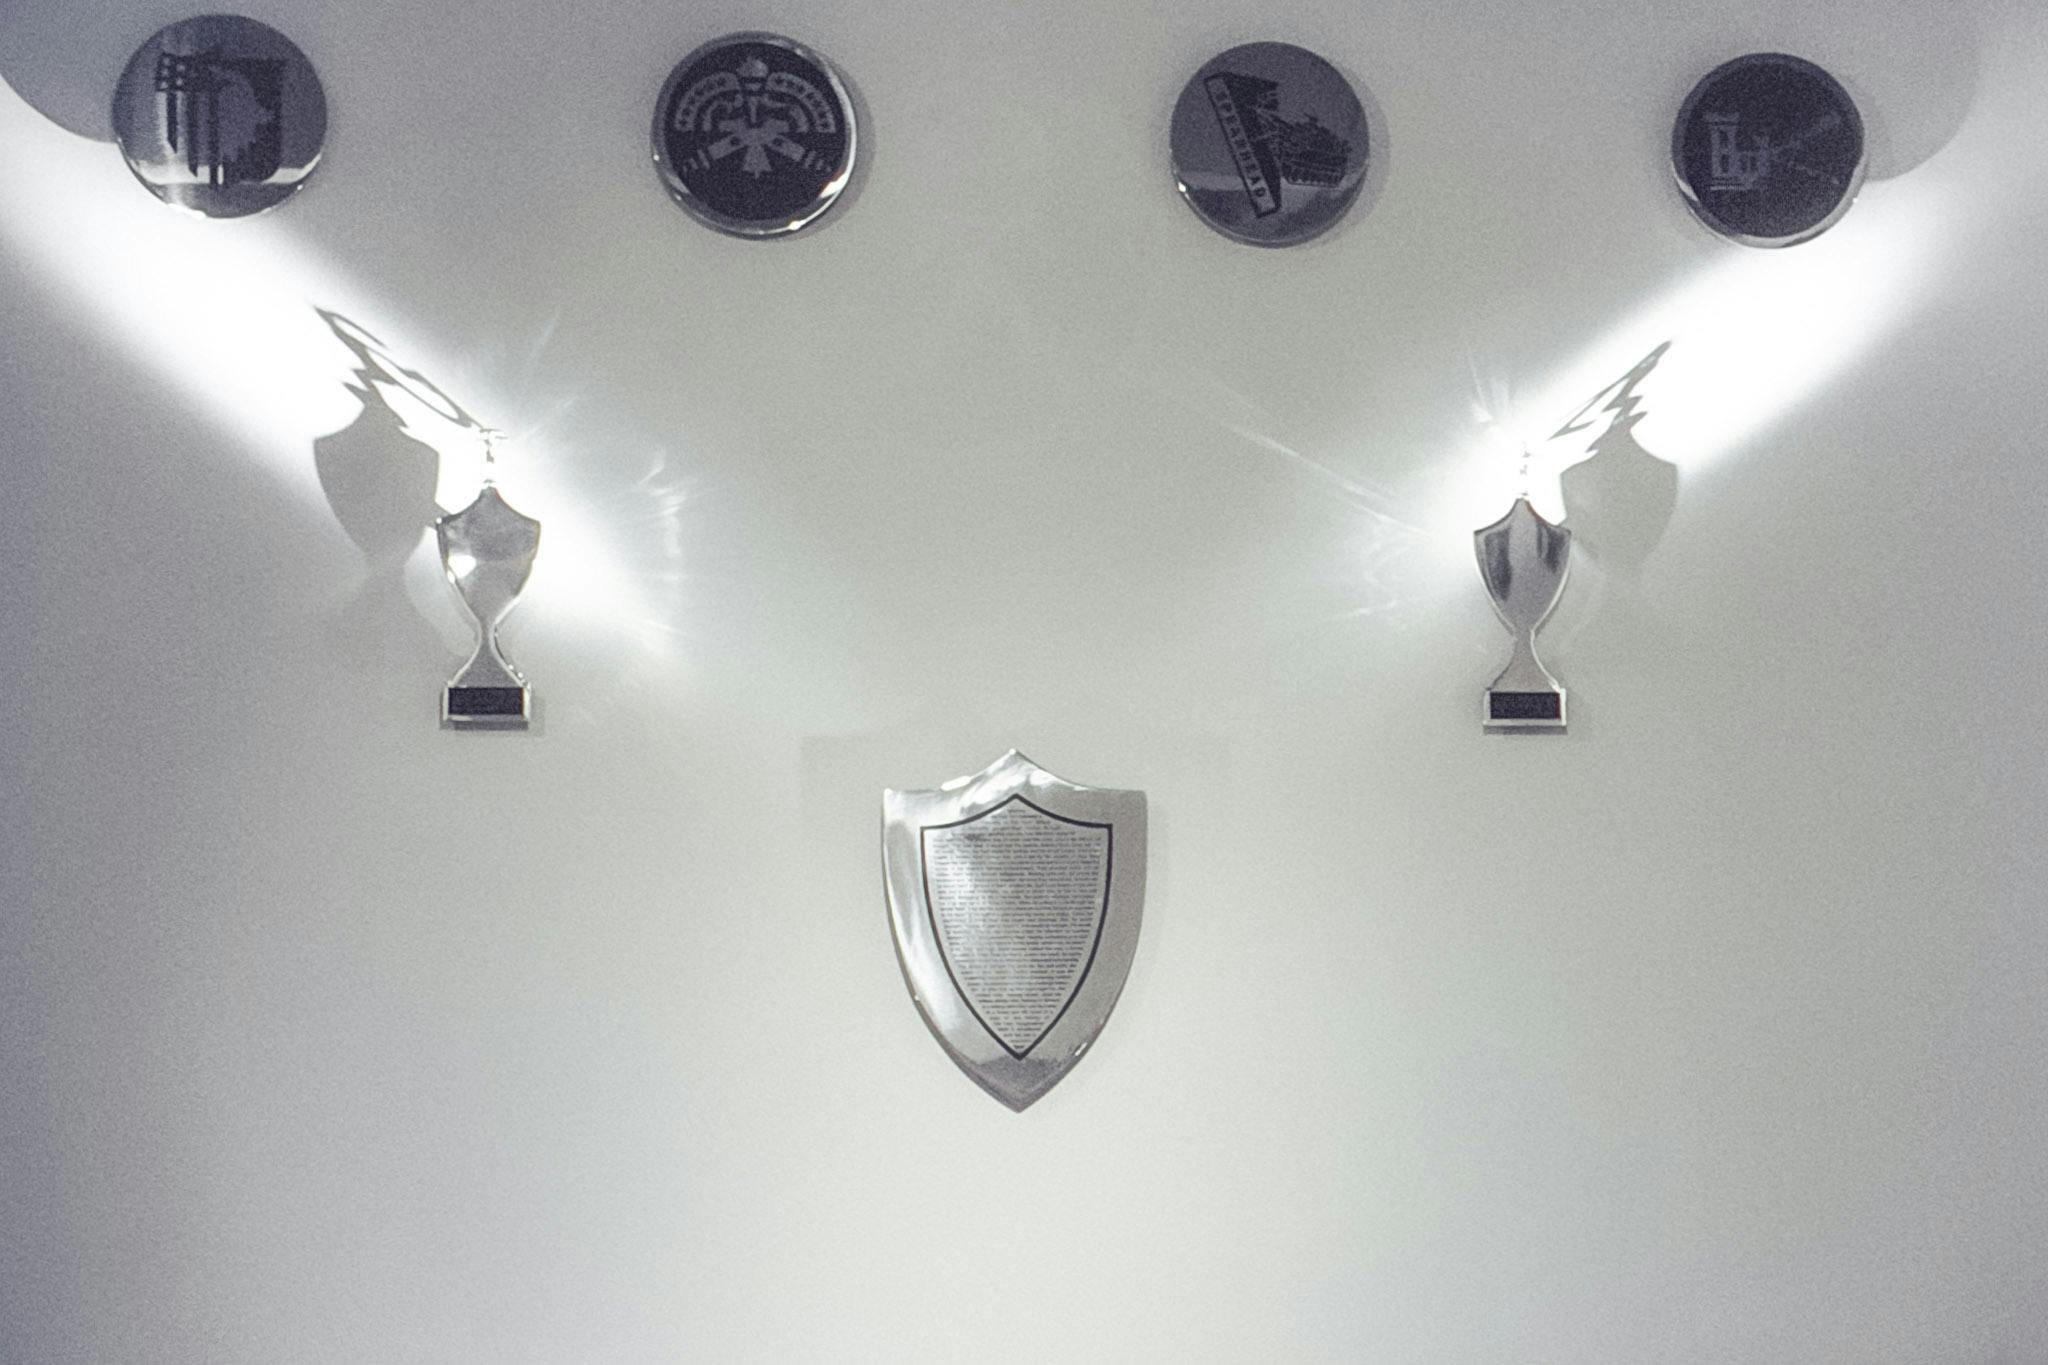 Several artworks on a white wall. At the top, there's a row of 4 metal circles with black crests. Below, there are 2 small trophy shapes . At the bottom center there is a shield shape with small text.